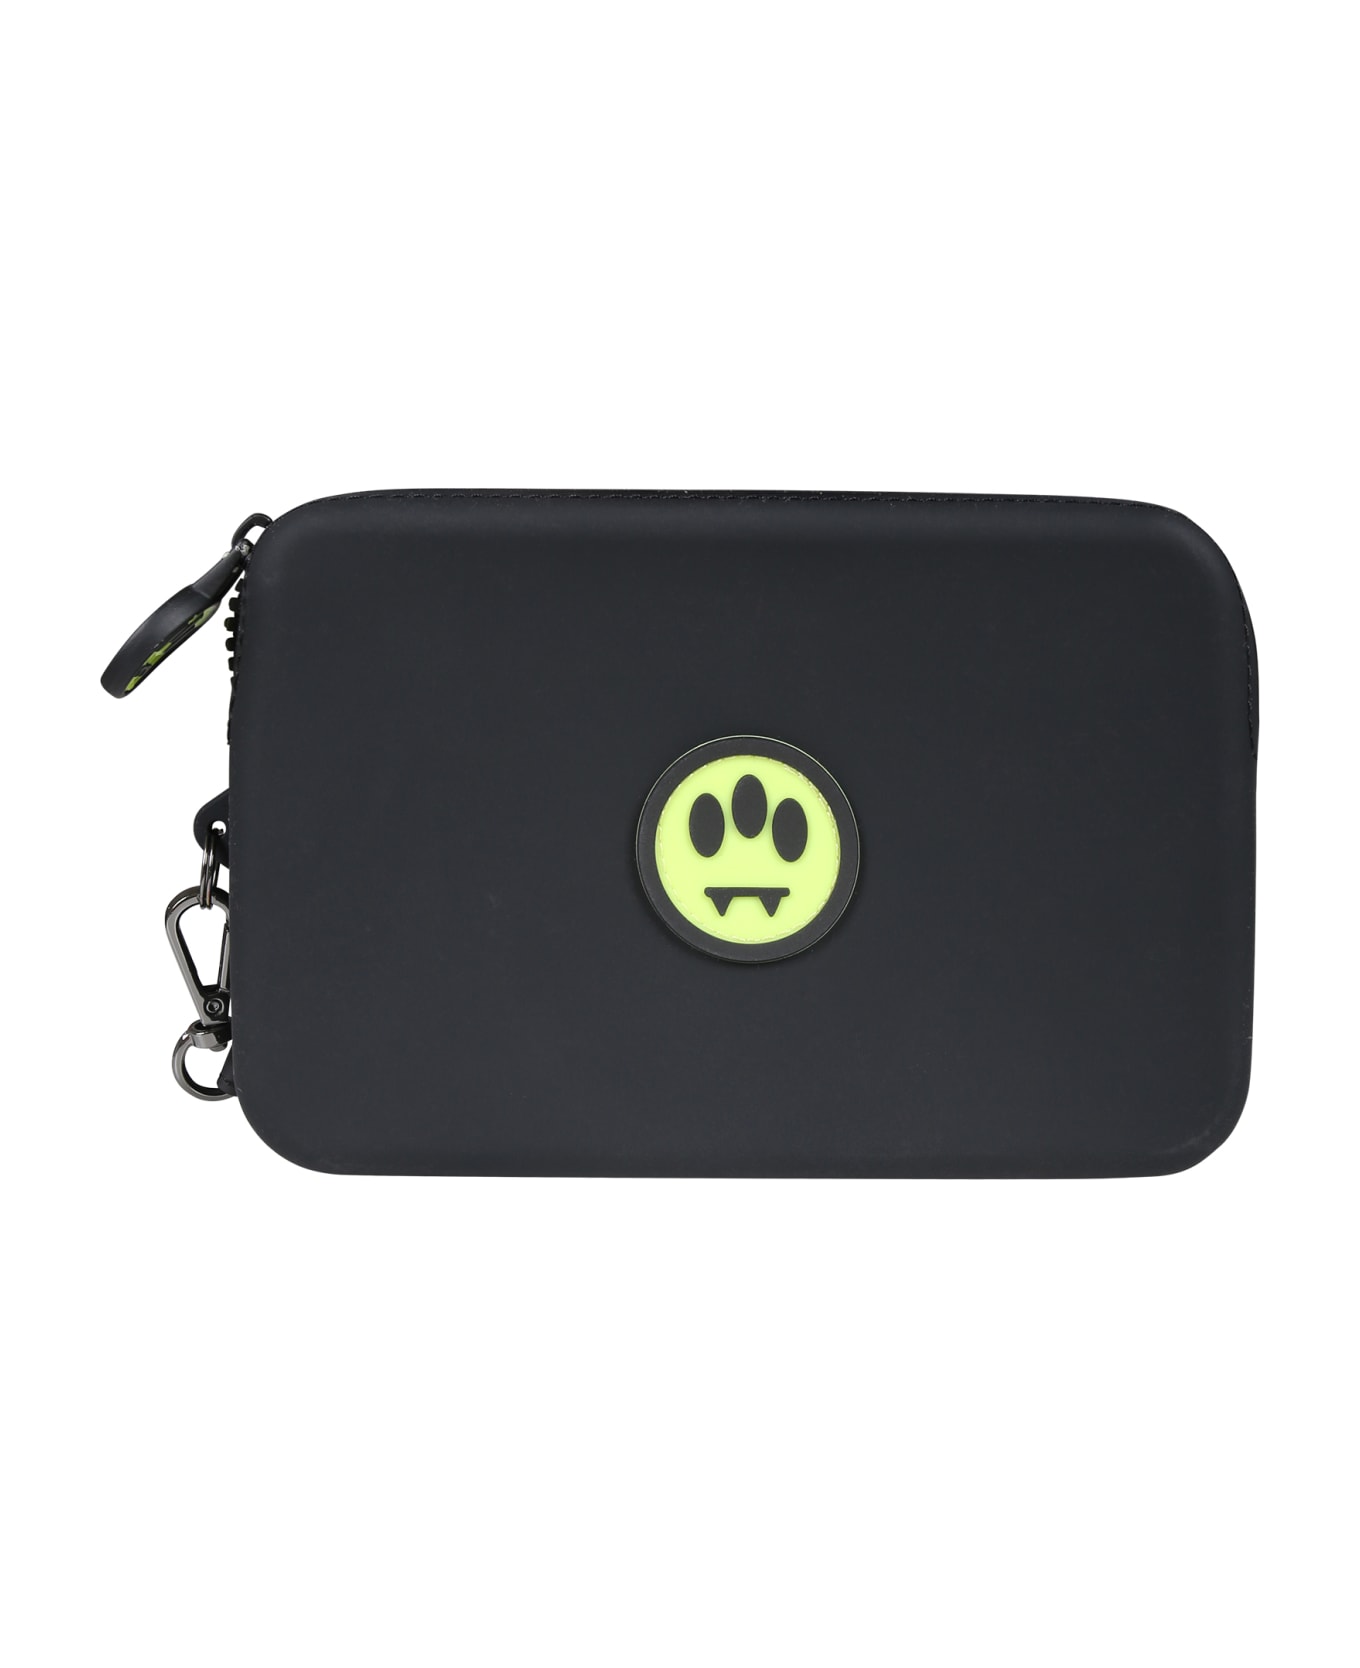 Barrow Black Clutch Bag For Girl With Smiley - Black